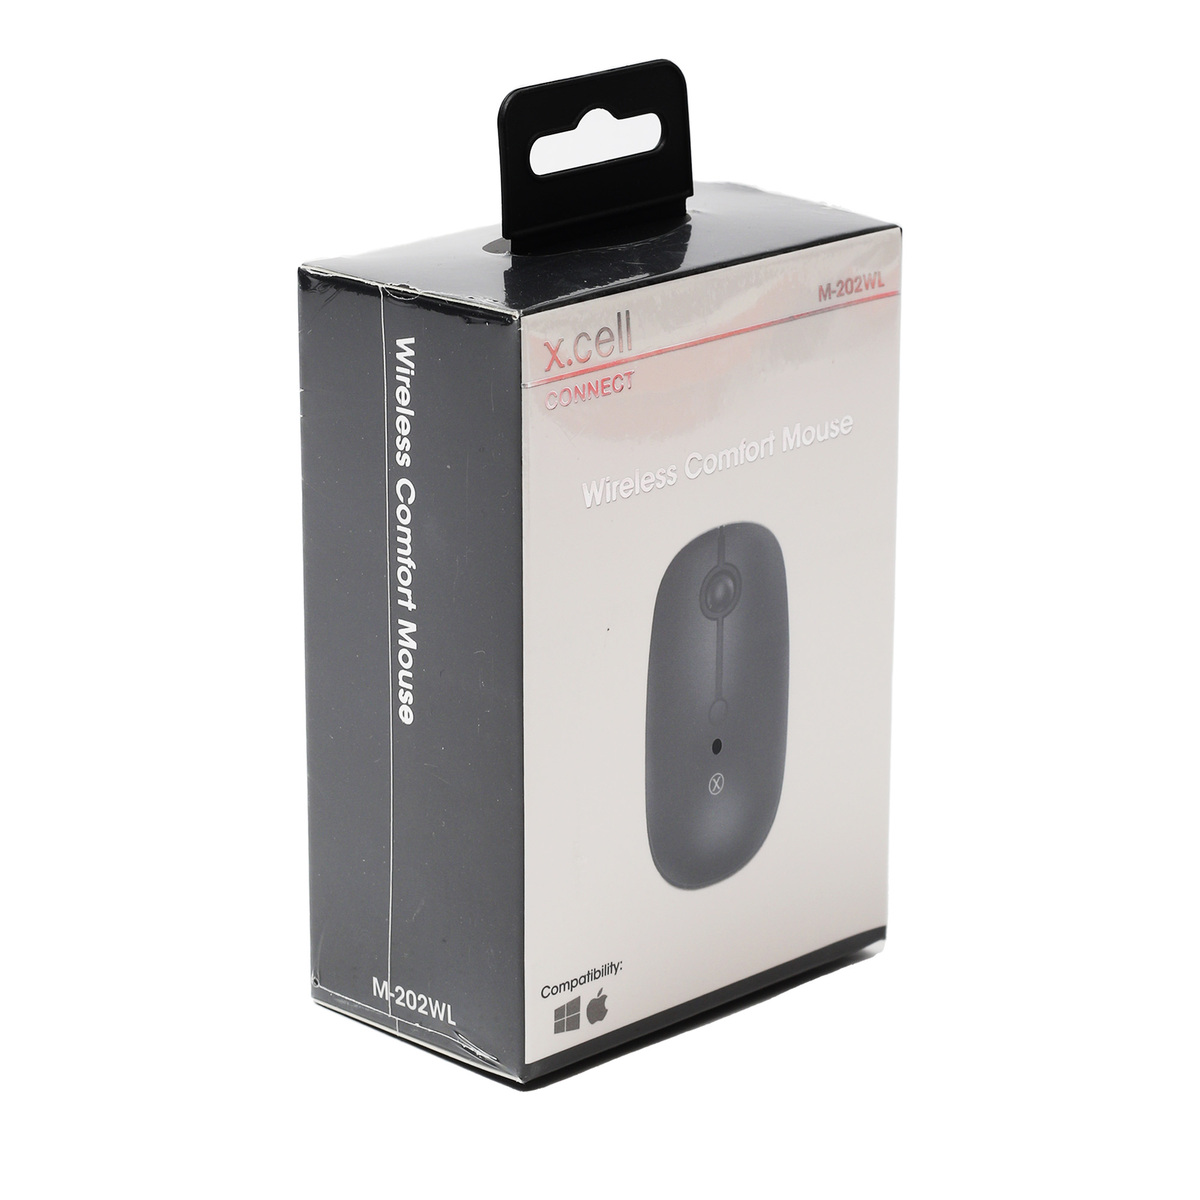 X.Cell Wireless Comfort Mouse M-202WL